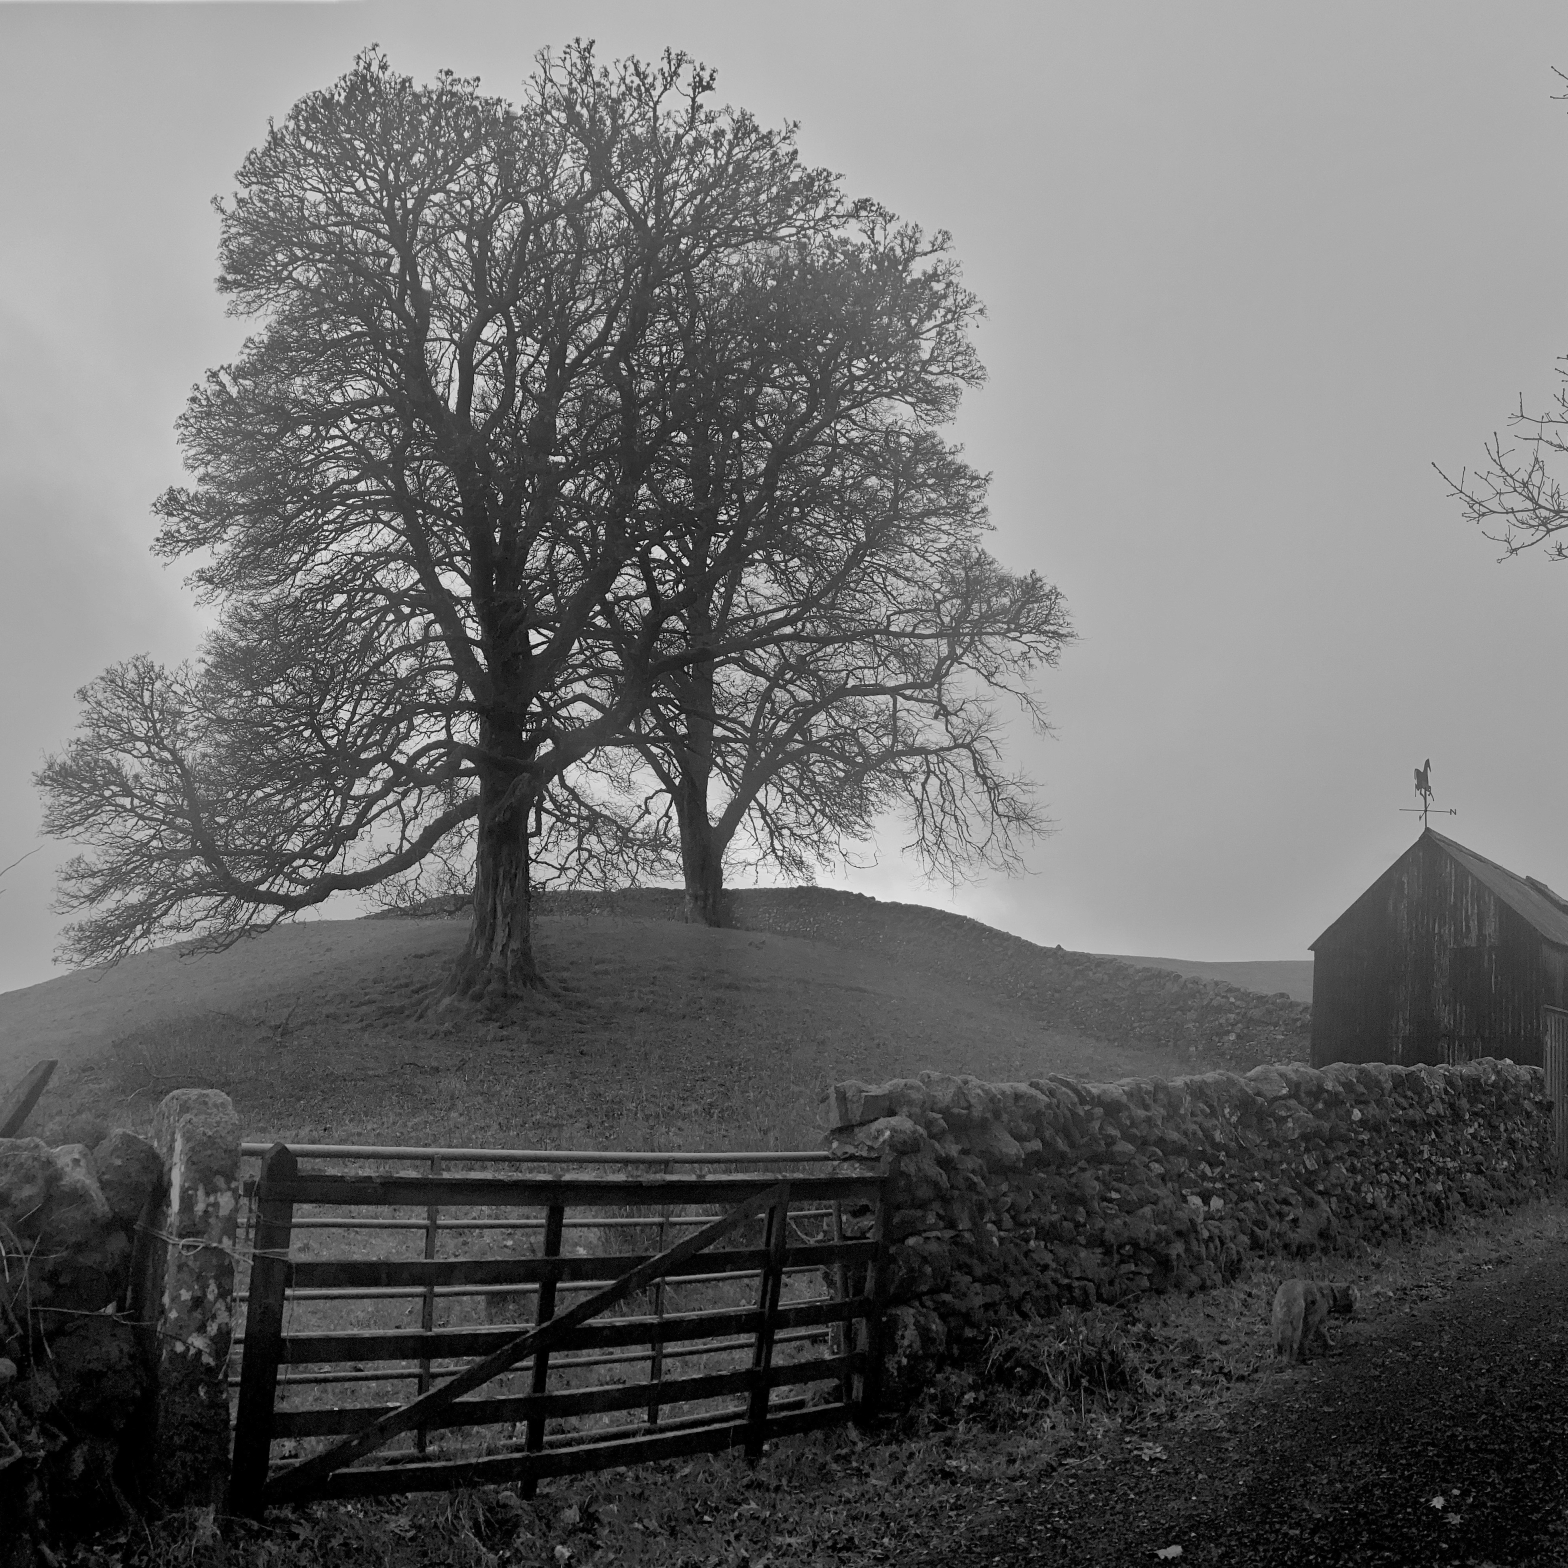 Two tree on a hill merge into one. There is a wide gate and a stone wall in the foreground, an old barn with a rooster weather vein to the right.